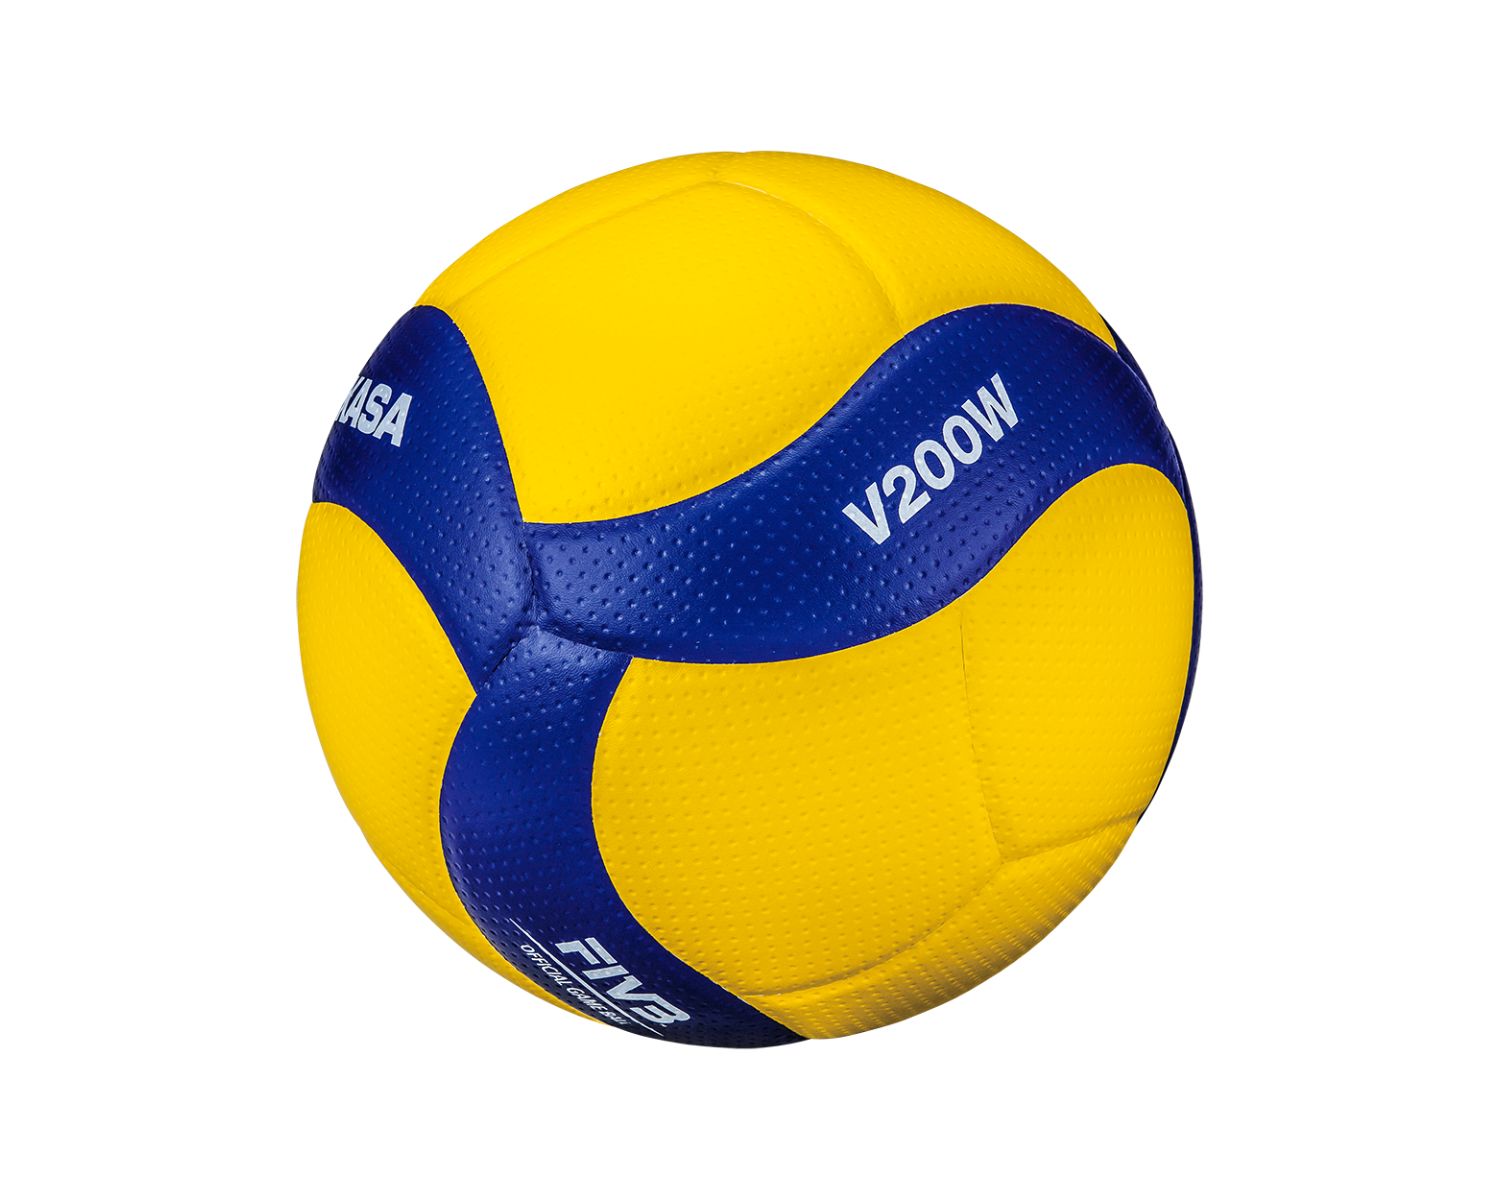 Volleyball Review: Unbiased Analysis and Recommendations